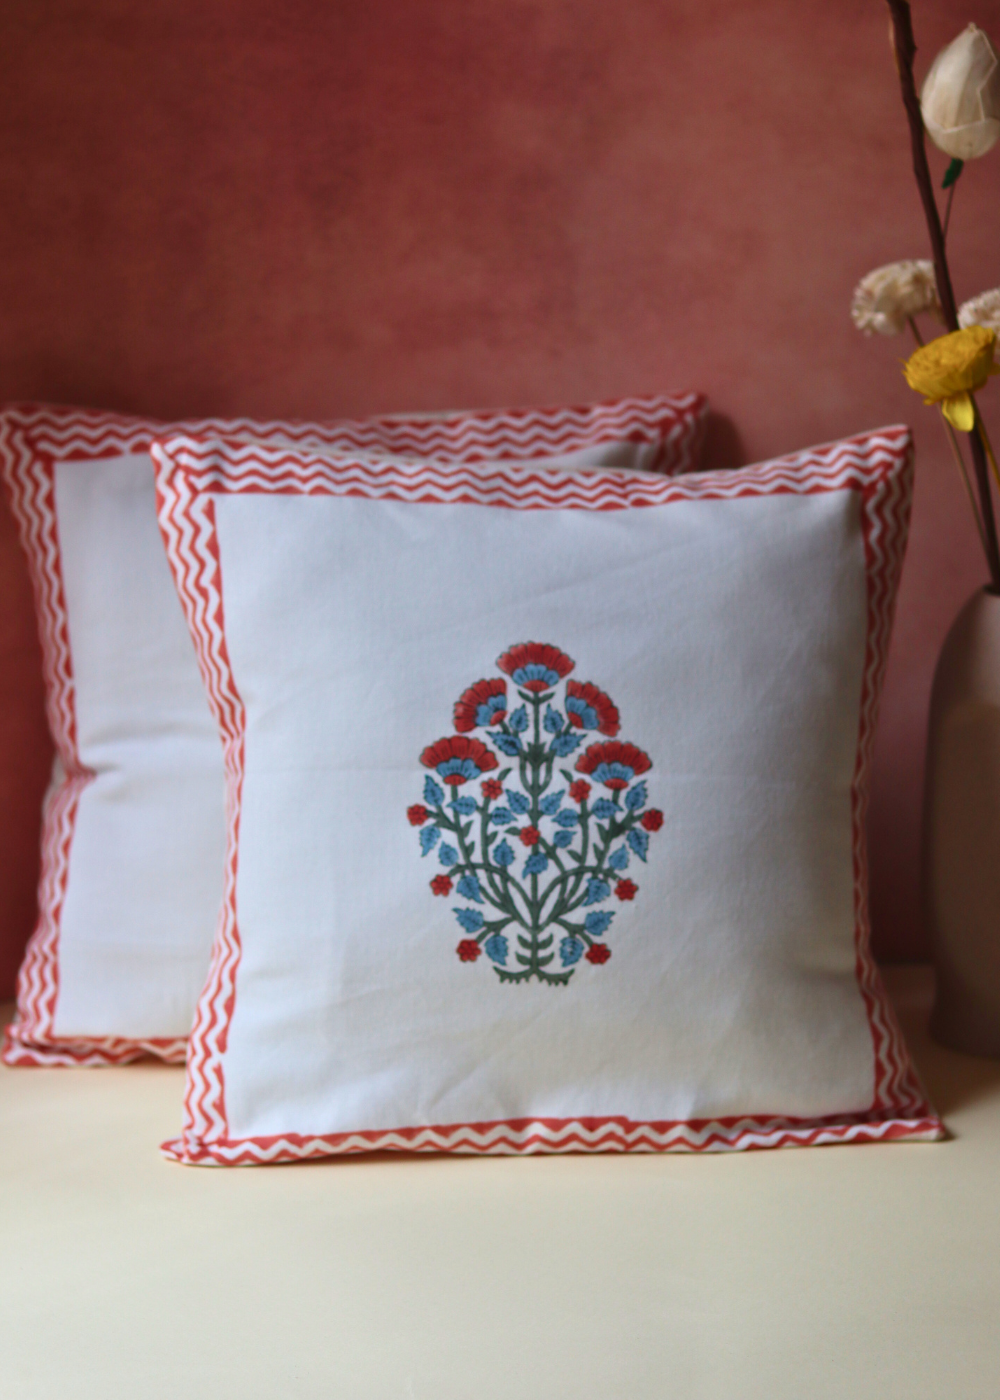 Pink Bloom Block Printed Cushion Cover - set of 2